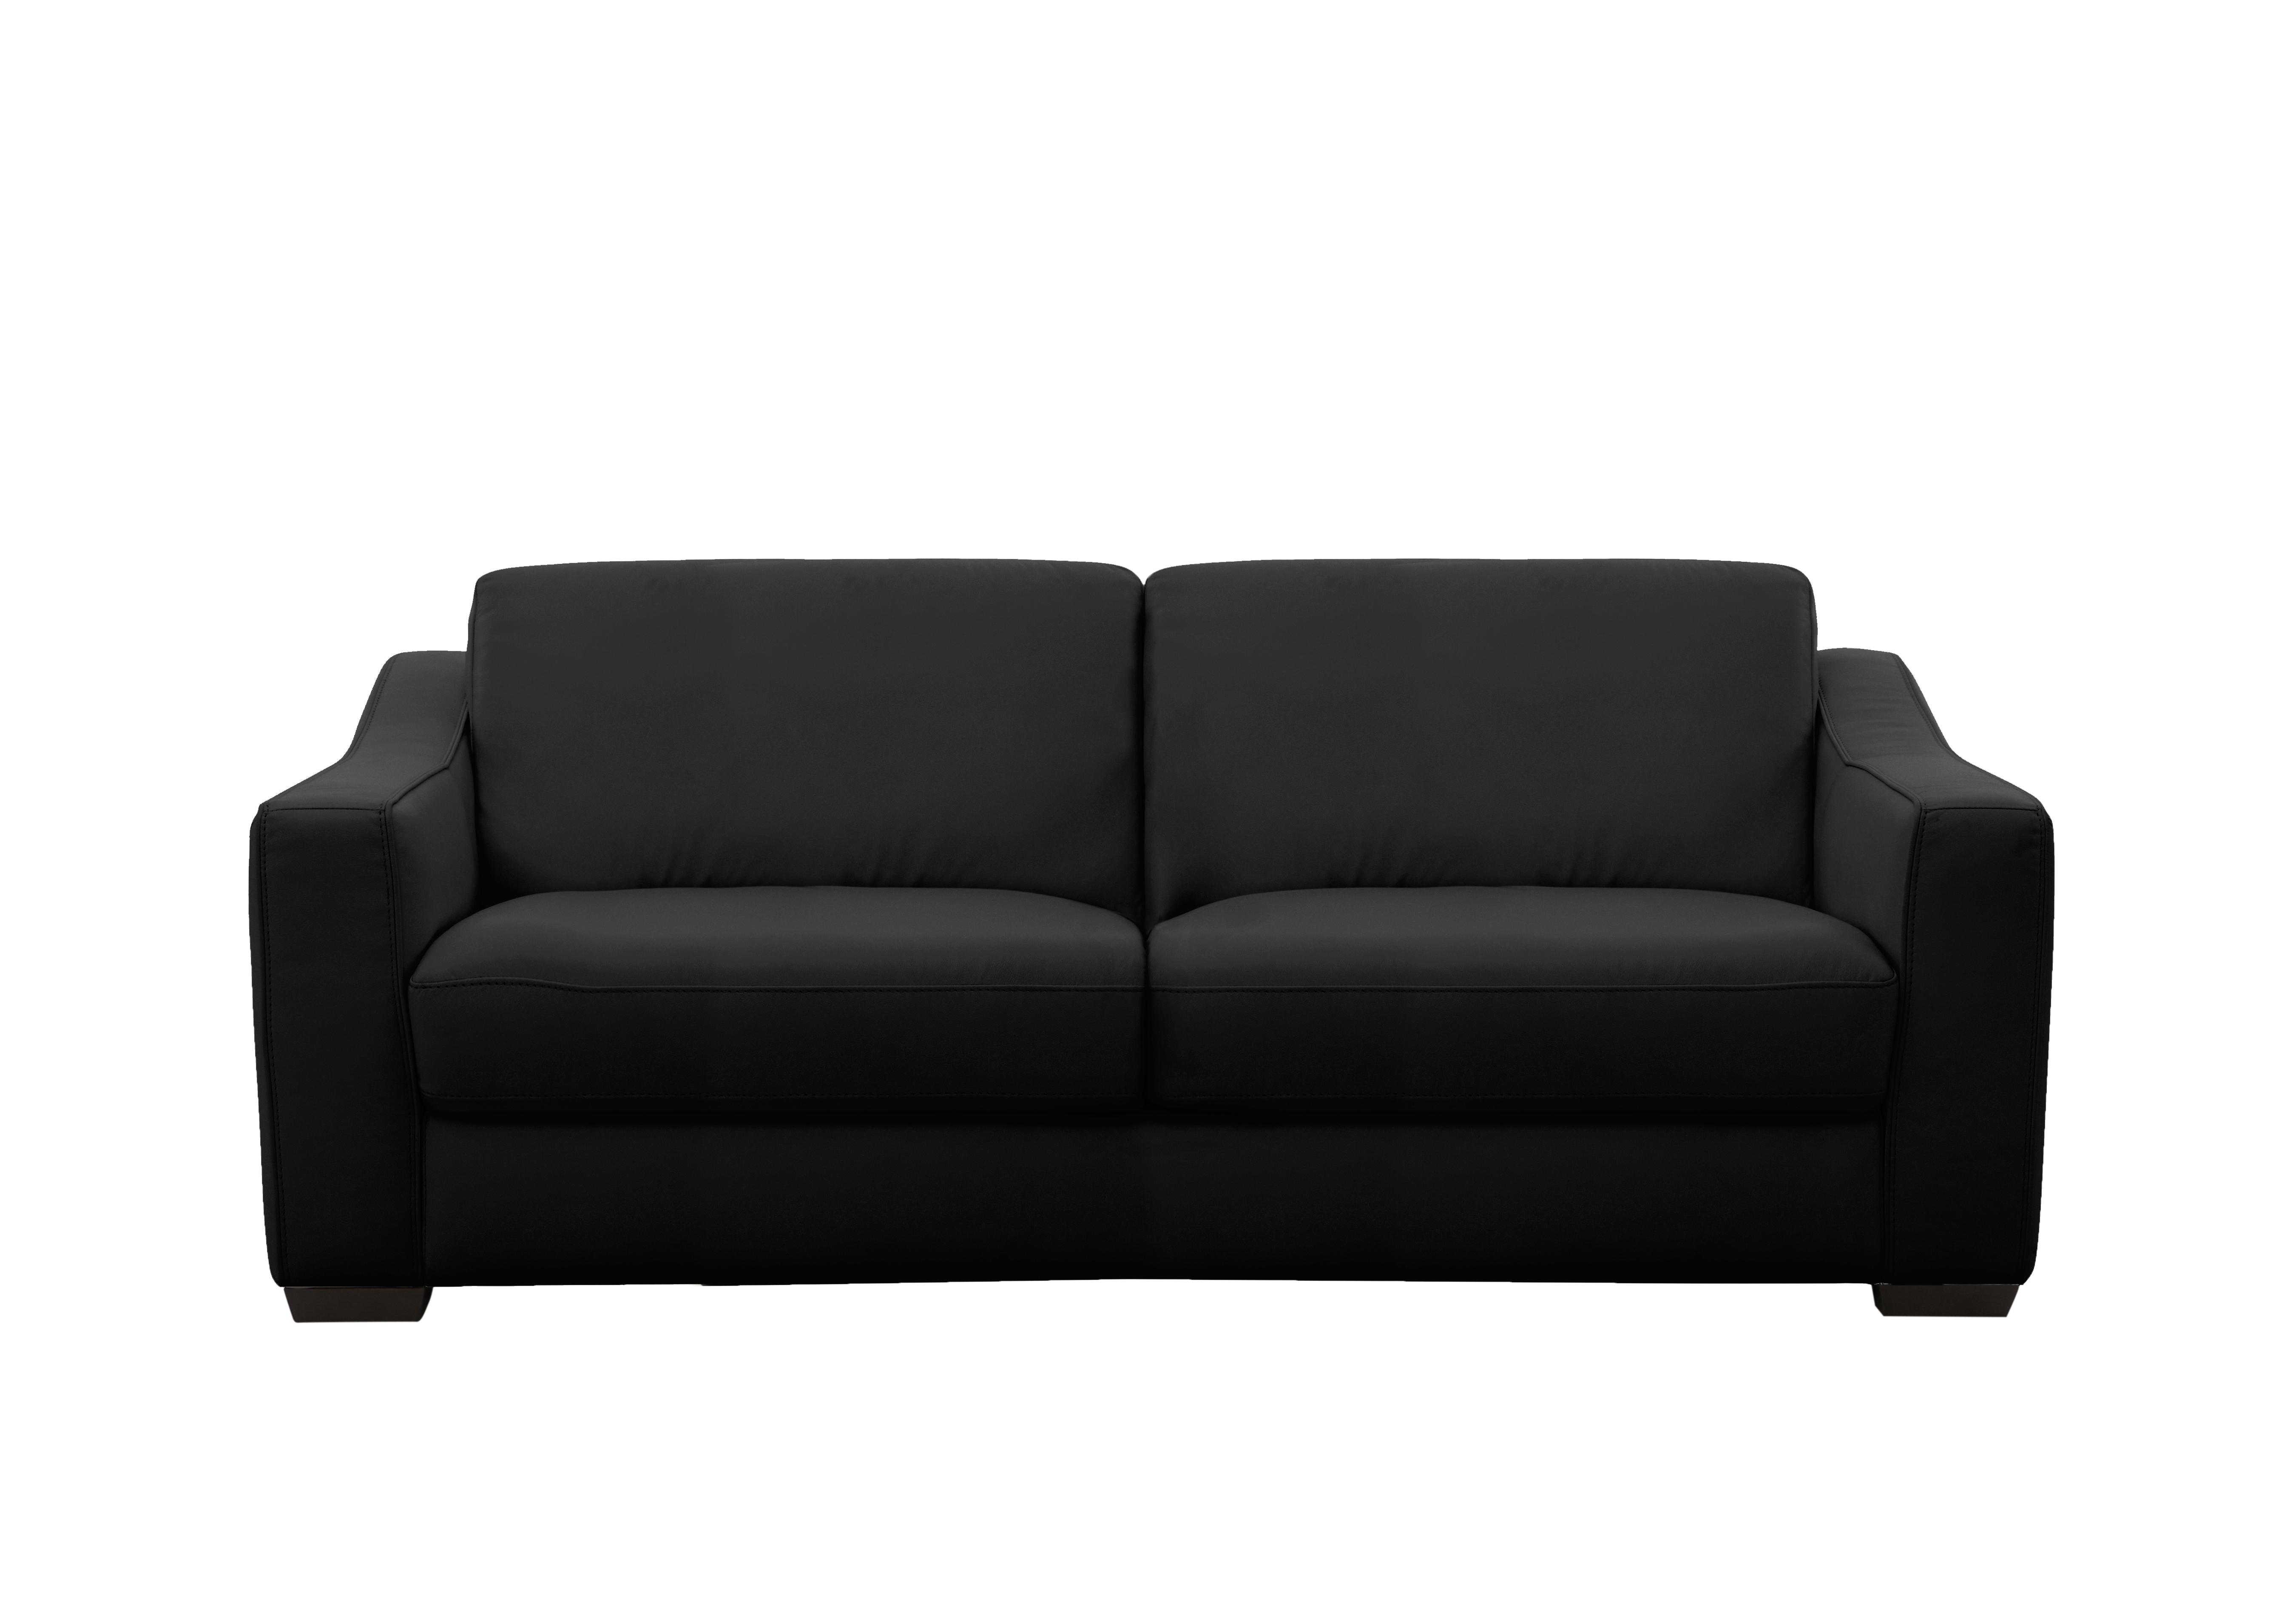 Optimus 3 Seater Leather Sofa in Bv-3500 Classic Black on Furniture Village